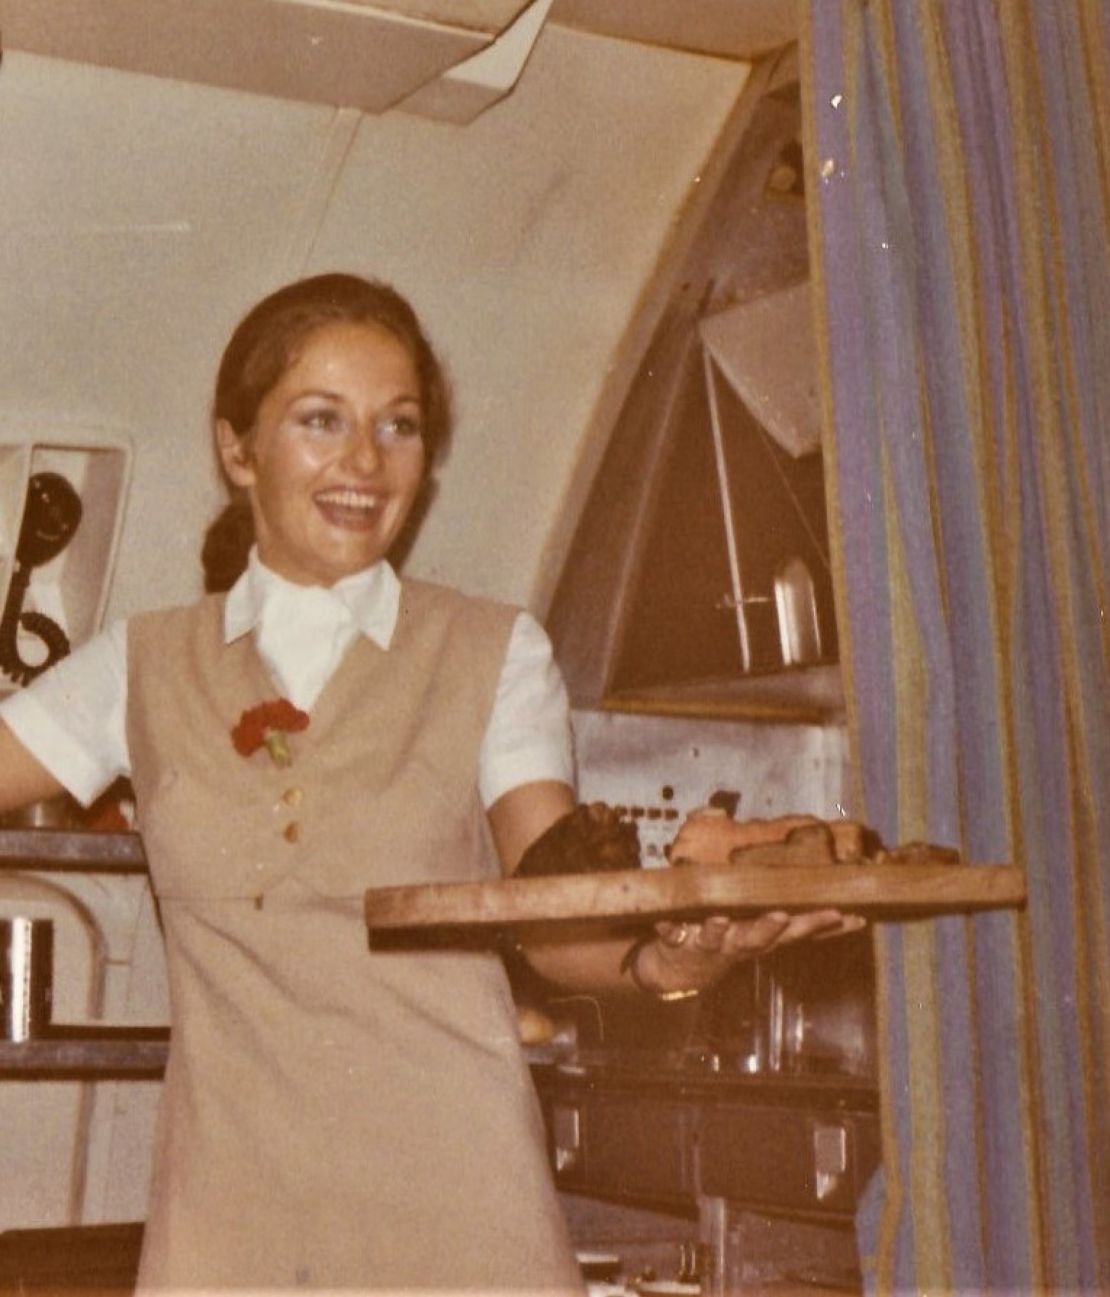 Here's Ilona photographed working in the galley of a Pan Am airplane.